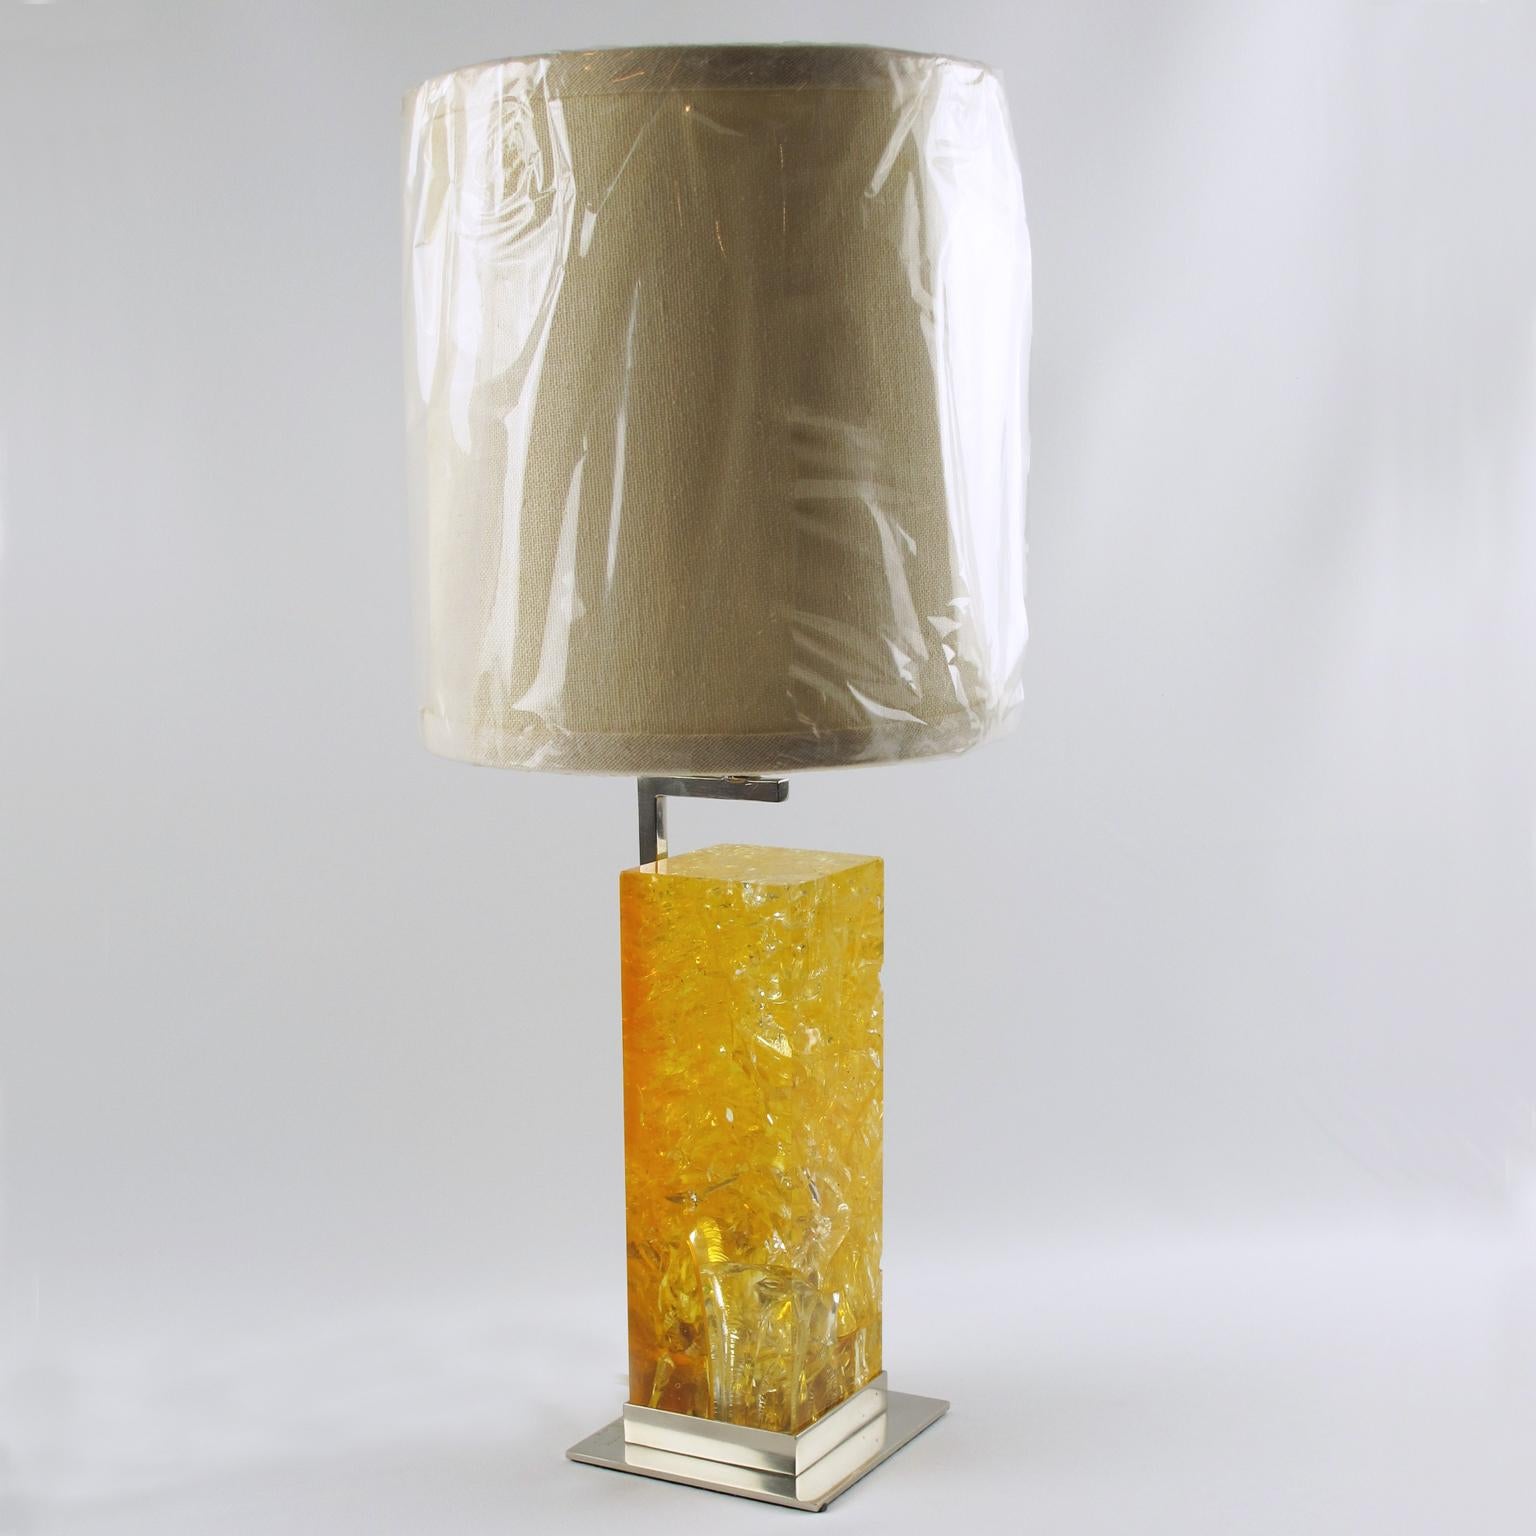 French designer Marie-Claude de Fouquieres designed this stunning fractal resin table lamp for the French lighting company Ombre et Lumiere, Paris, in the 1970s. The piece boasts a large resin block with a vivid yellow color, nickel-plated base, and